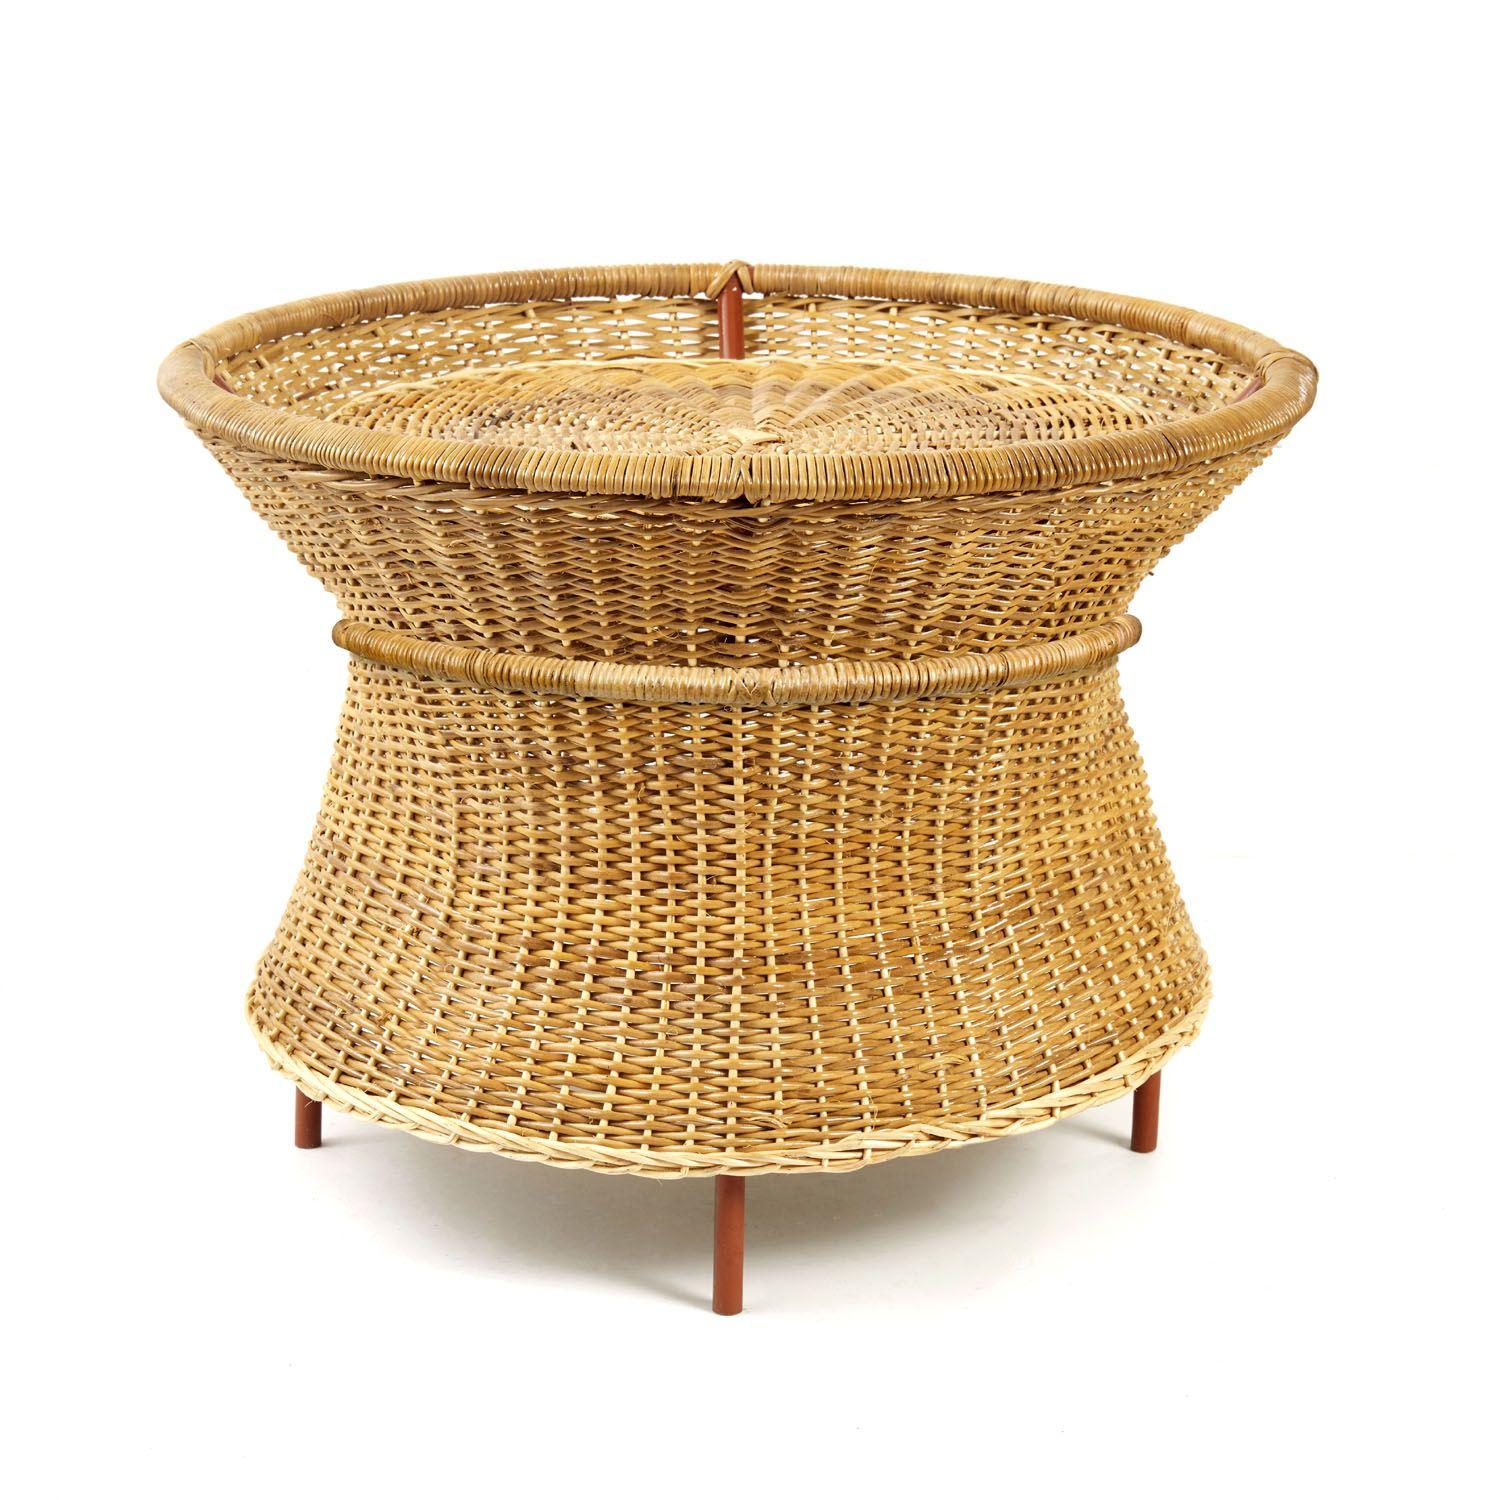 Caribe natural basket table by Sebastian Herkner
Materials: Wicker from Bejuco roots. Galvanized and powder-coated tubular steel frame.
Technique: Weaved by local craftspeople in Colombia. 
Dimensions: Diameter 54.1 x height 41 cm 
Available in